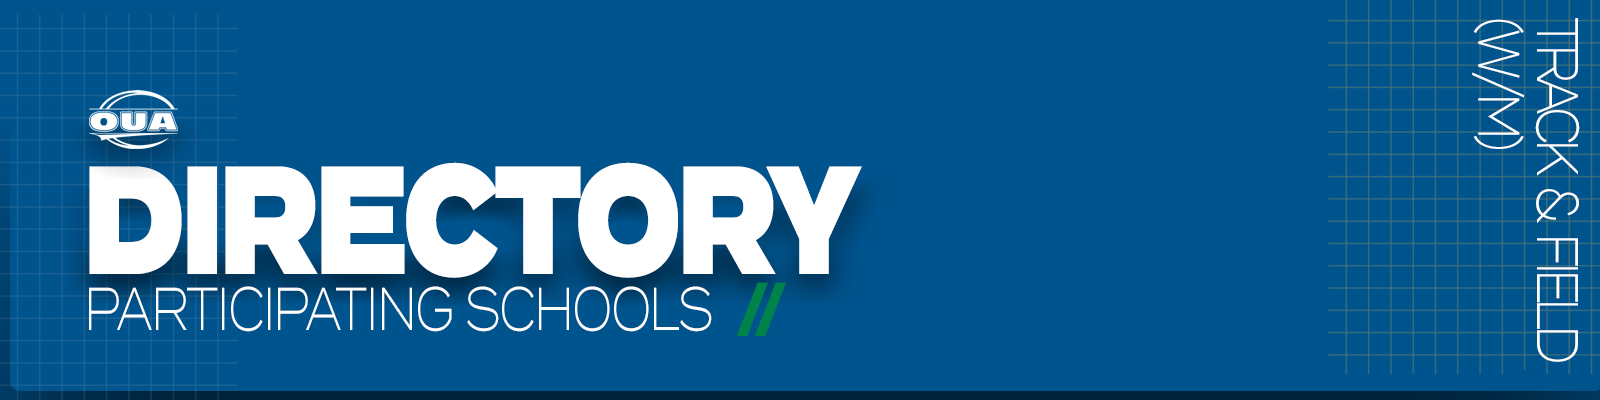 Predominantly blue graphic with large white text on the left side that reads 'Directory, Participating Schools' and small white vertical text on the right side that reads 'Track & Field'